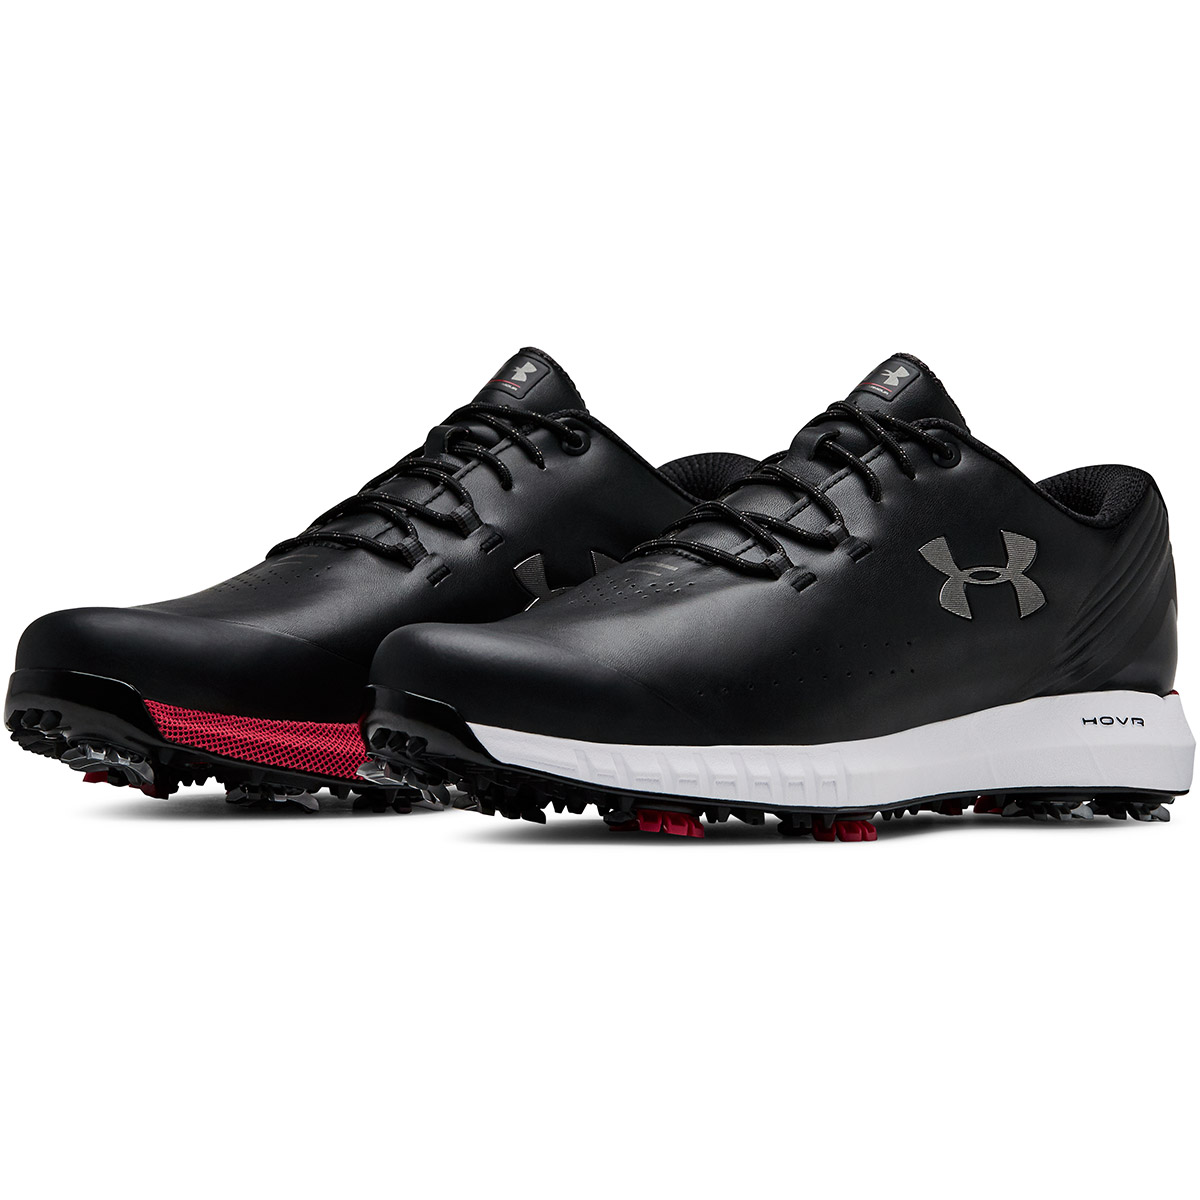 Under Armour HOVR Drive Shoes from american golf